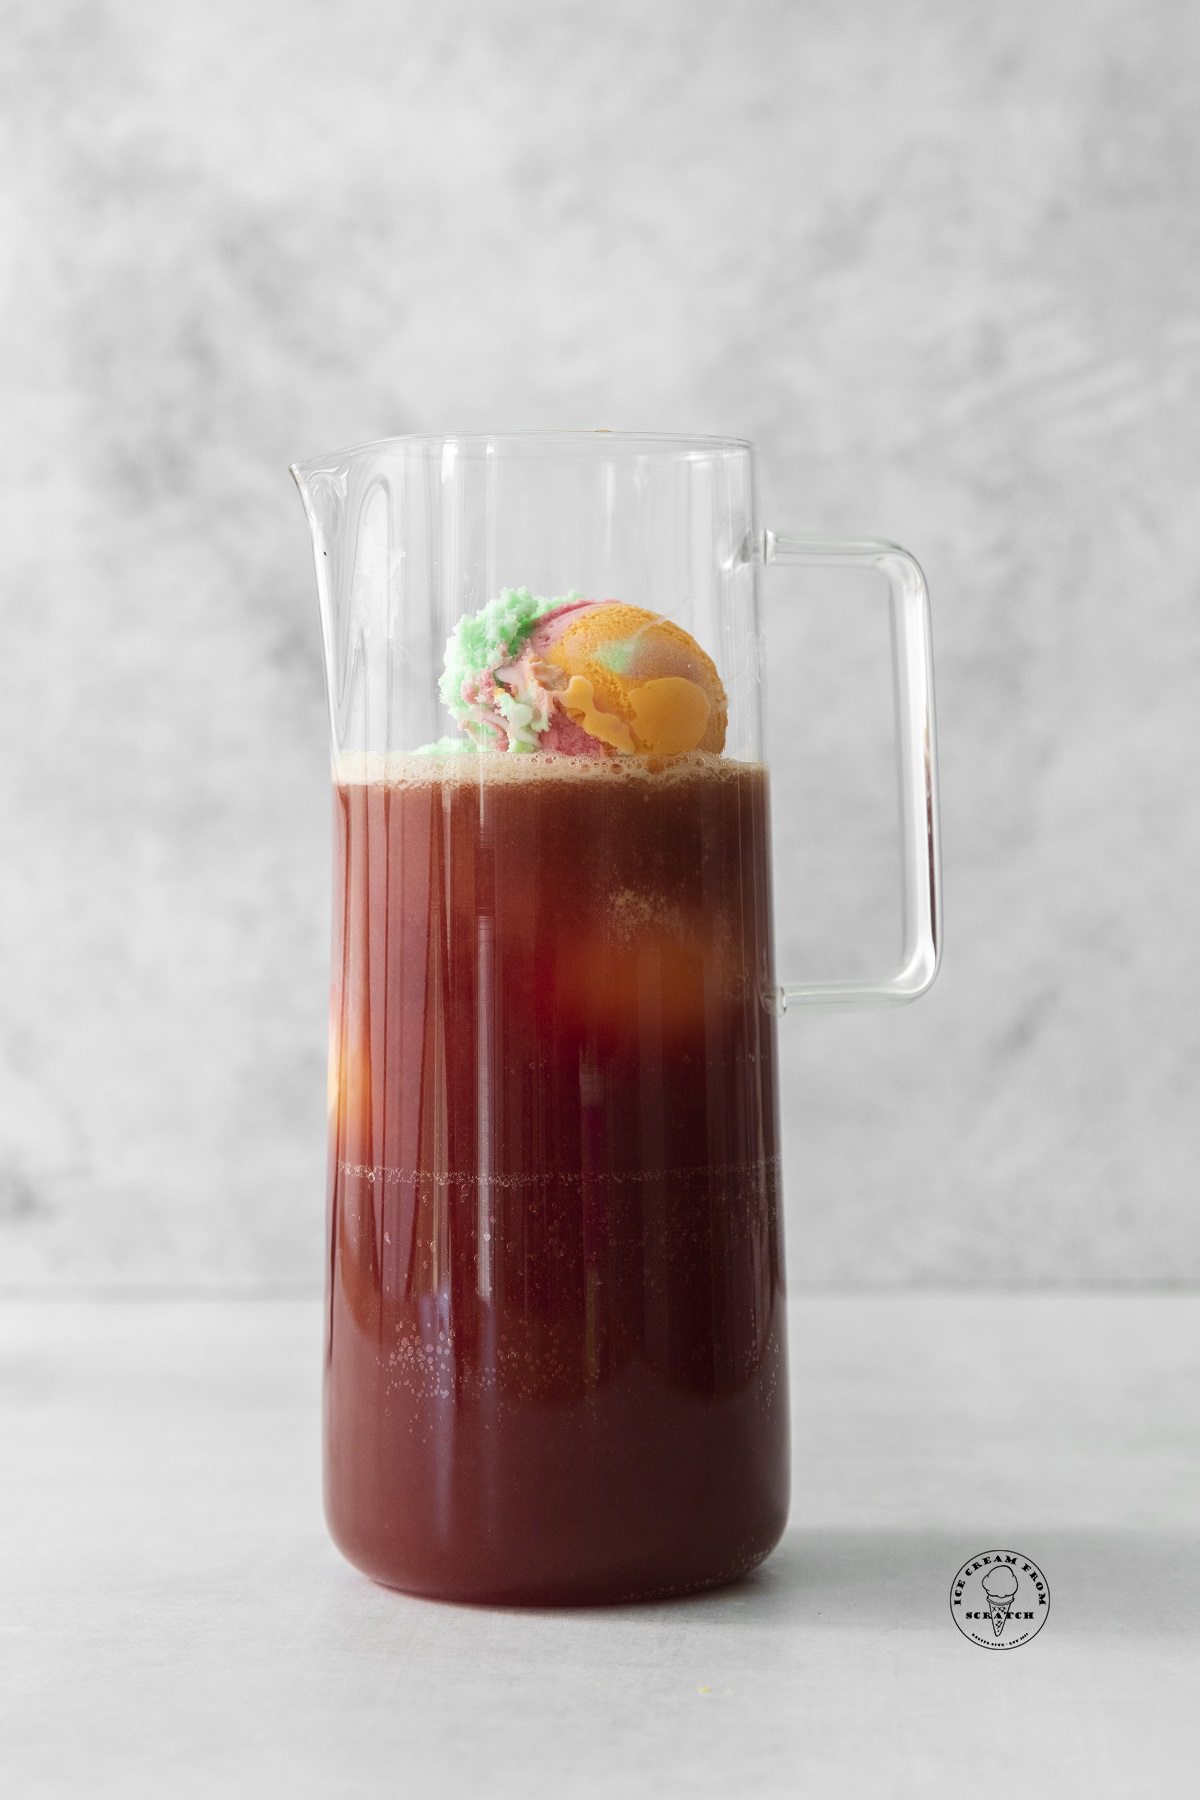 a slim clear glass pitcher filled with dark red punch and rainbow sherbet balls.